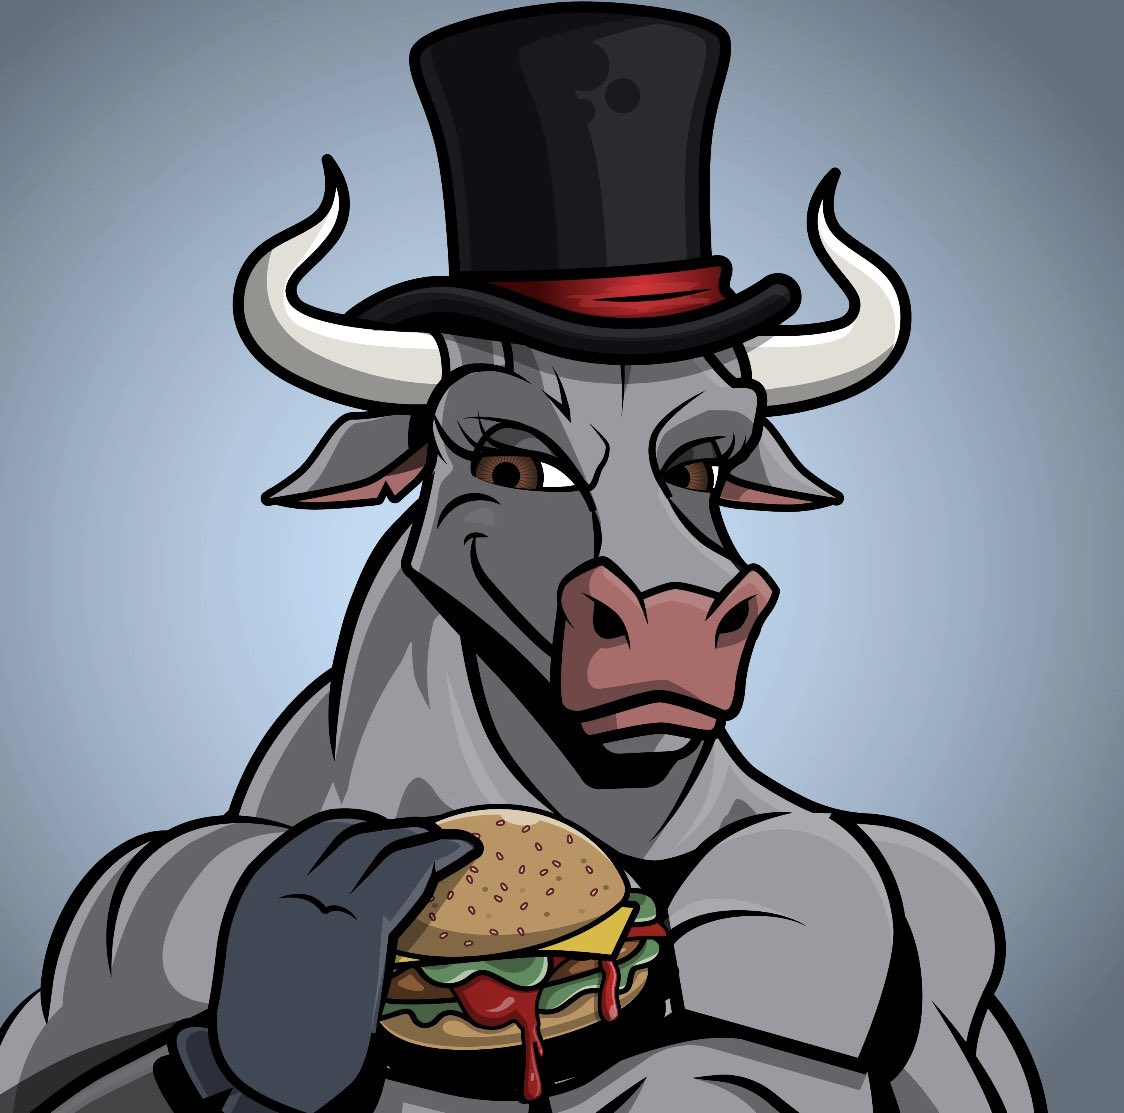 Narrative? A $bull walks into a bar and, almost by magic, becomes @Bullbarcoin // a meme beast designed to feast on market cap and cheeseburgers // $hbar Hello Future